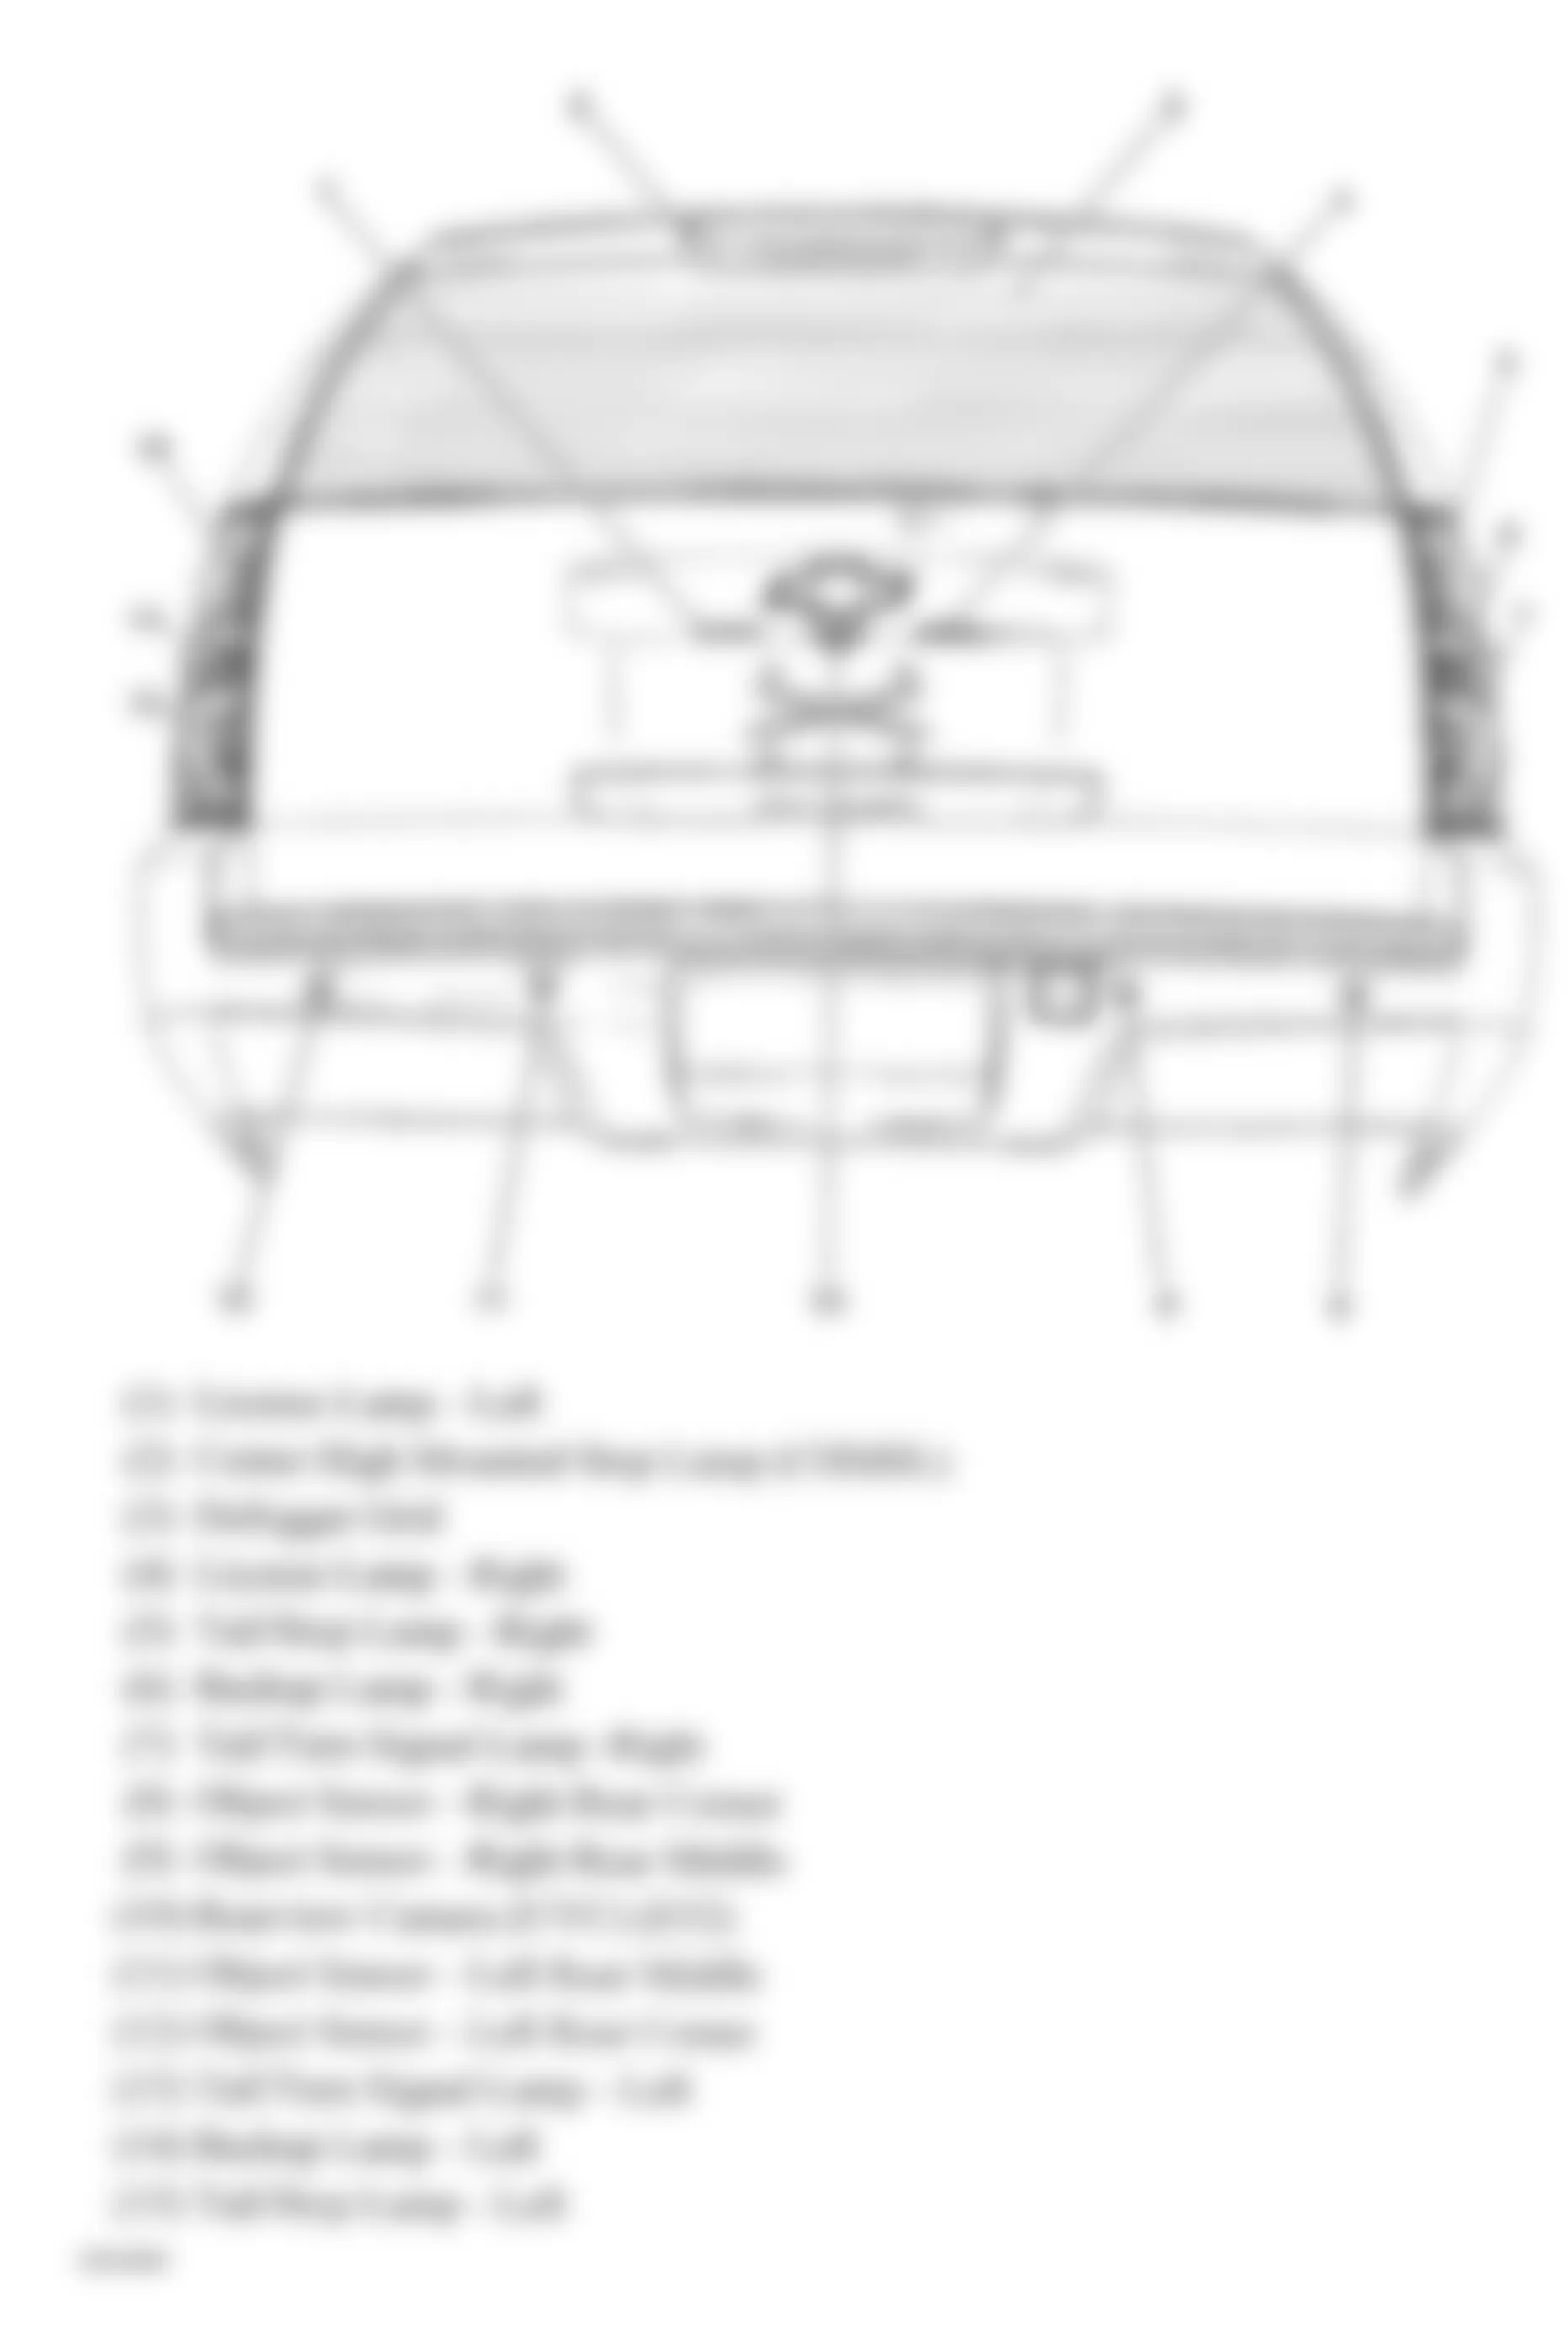 Chevrolet Suburban K1500 2009 - Component Locations -  Rear Of Vehicle (Avalanche, Suburban & Tahoe W/One Piece Liftgate)